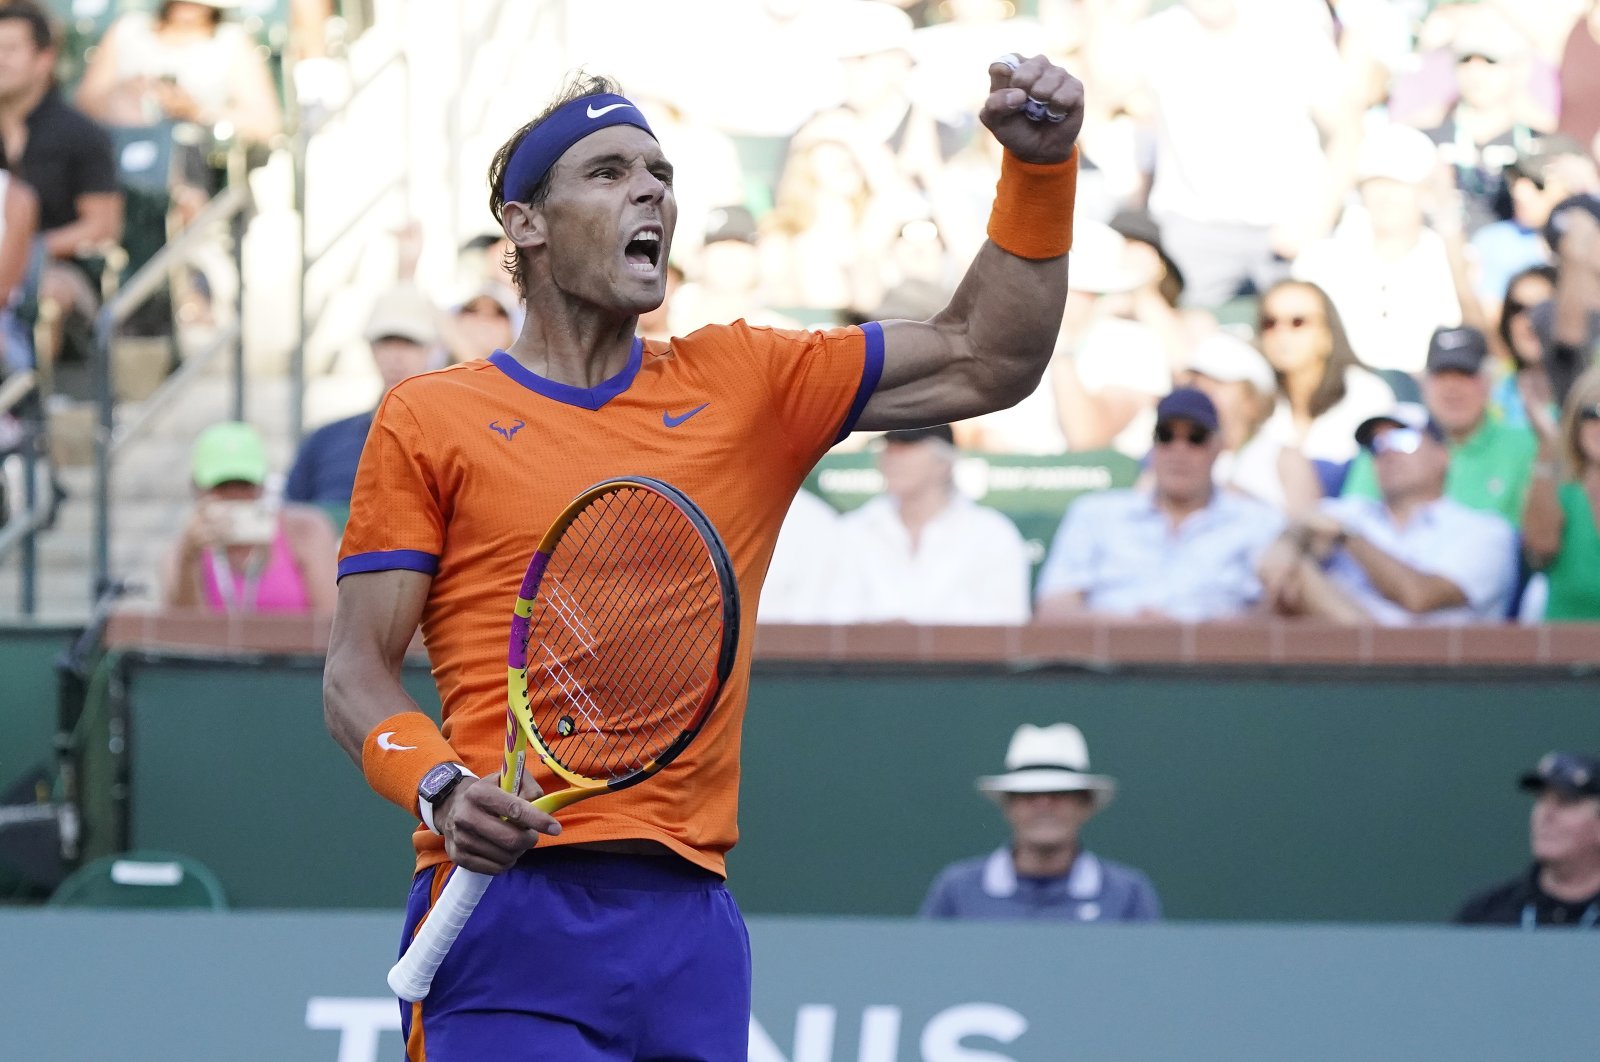 Rafael Nadal reacts in the Indian Wells Open quarterfinal against Nick Kyrgios Indian Wells, California, U.S., March 17, 2022. (AP Photo)